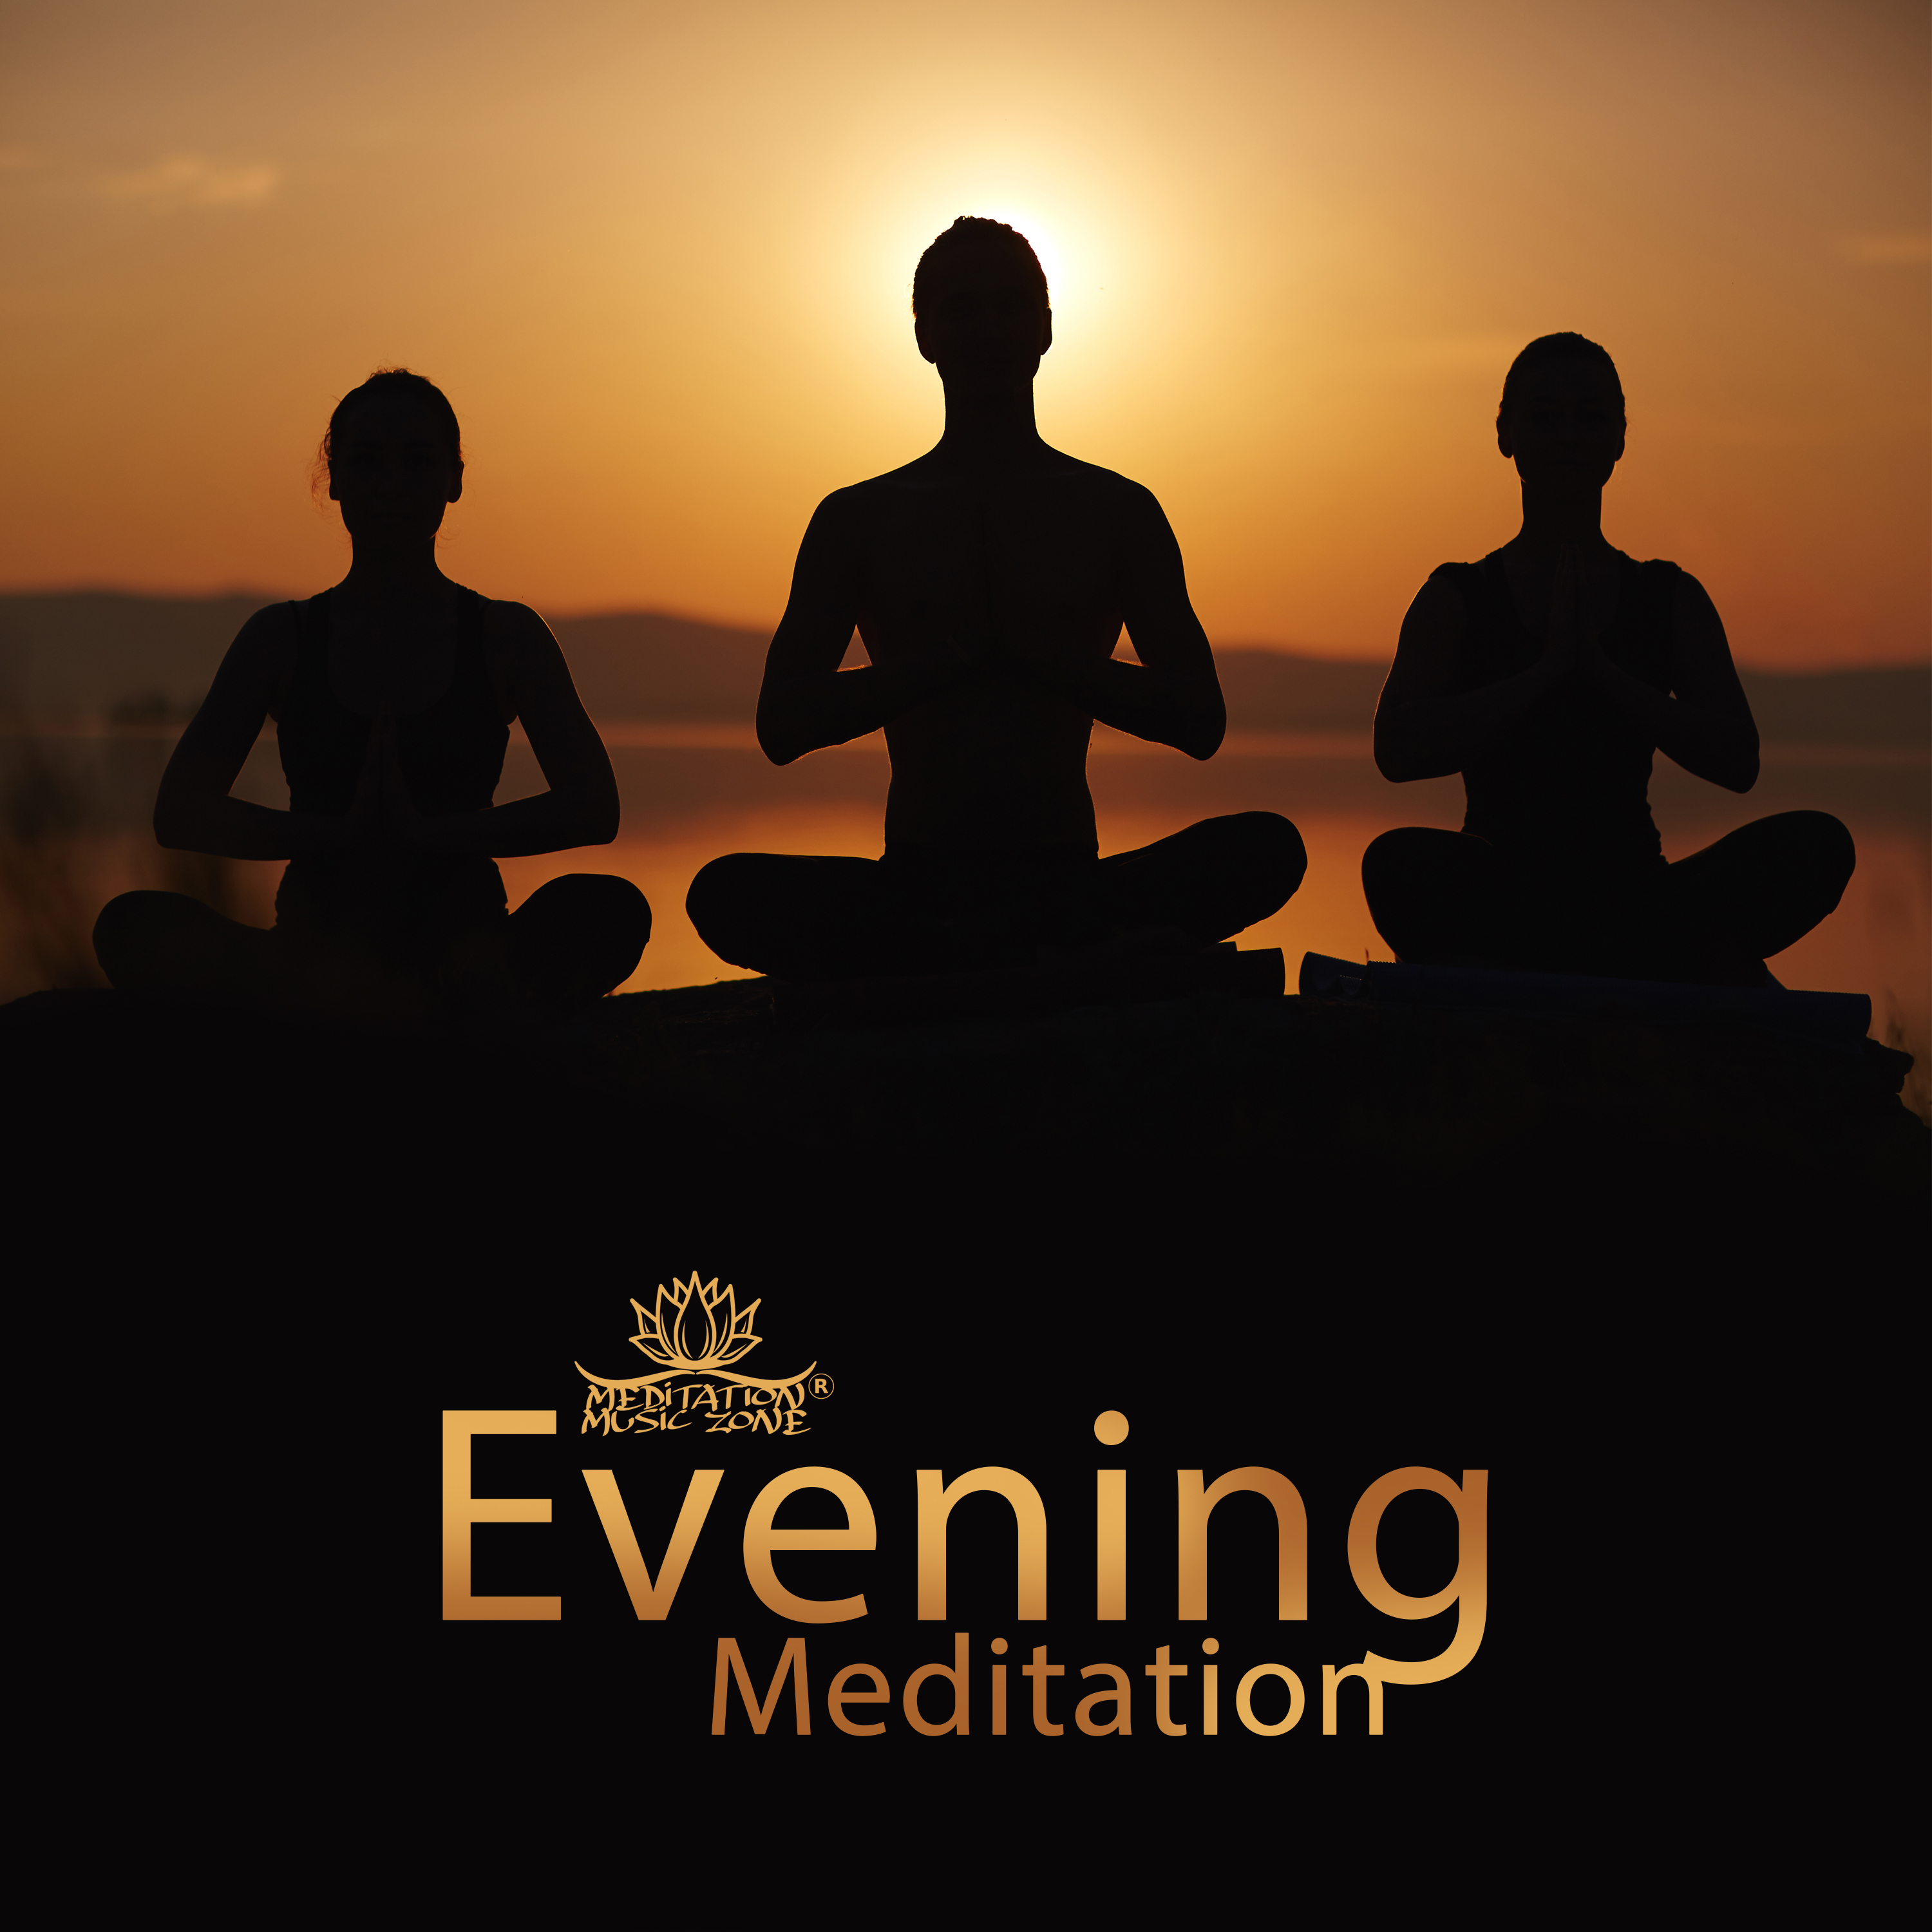 Evening Meditation (Calm Music for Relaxation, Deep Sounds for Meditation, Easy Listening, New Age Background Music)